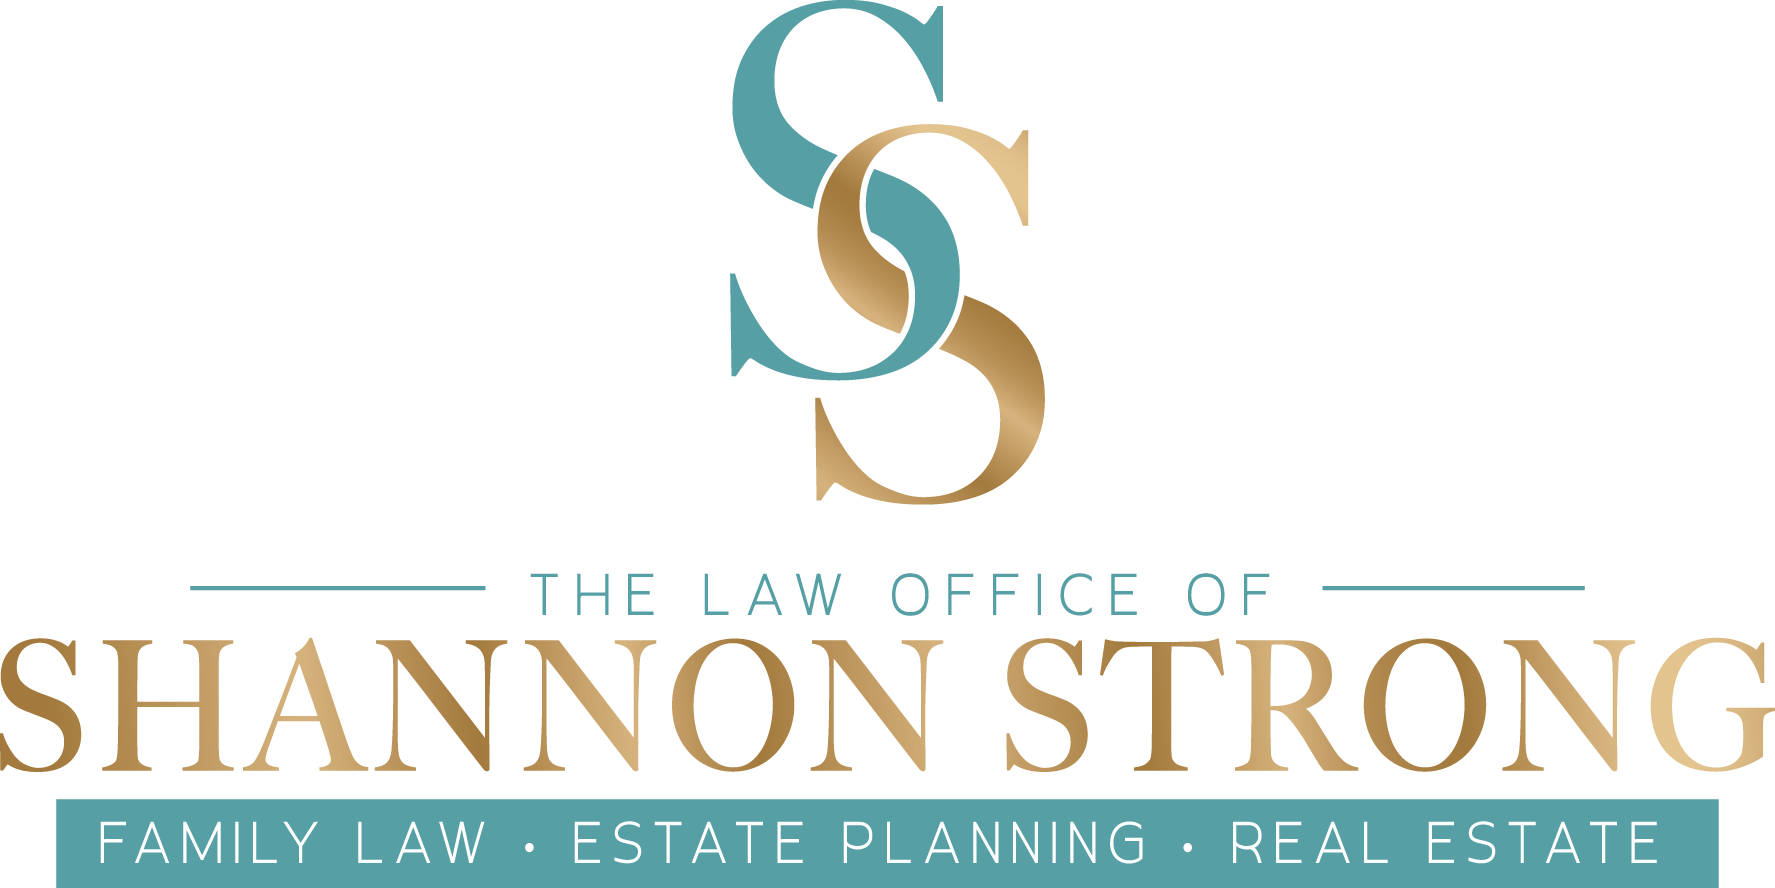 The law office of shannon strong family law estate planning real estate logo